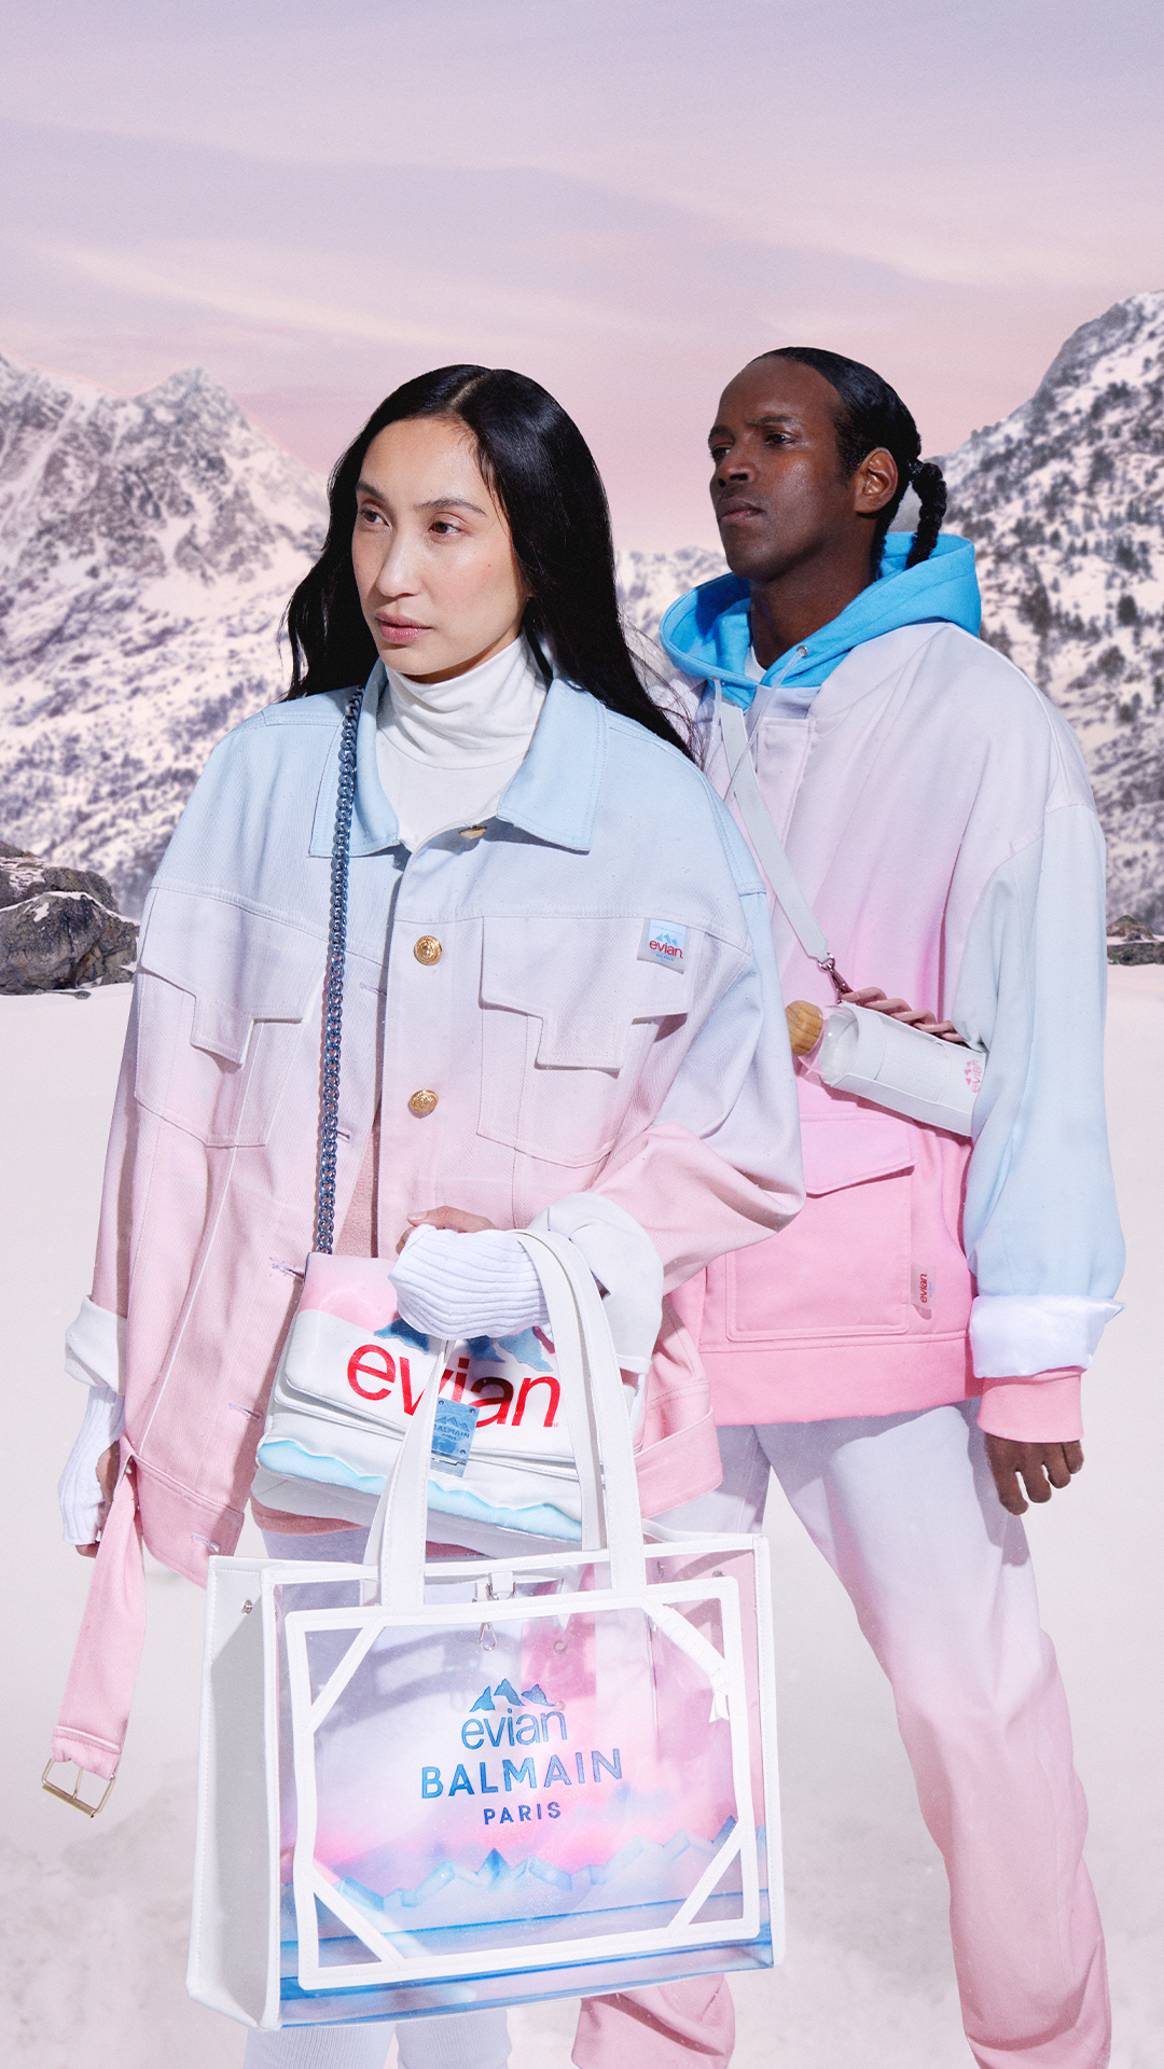 Image: Evian; Balmain x Evian collection of ready-to-wear and accessories